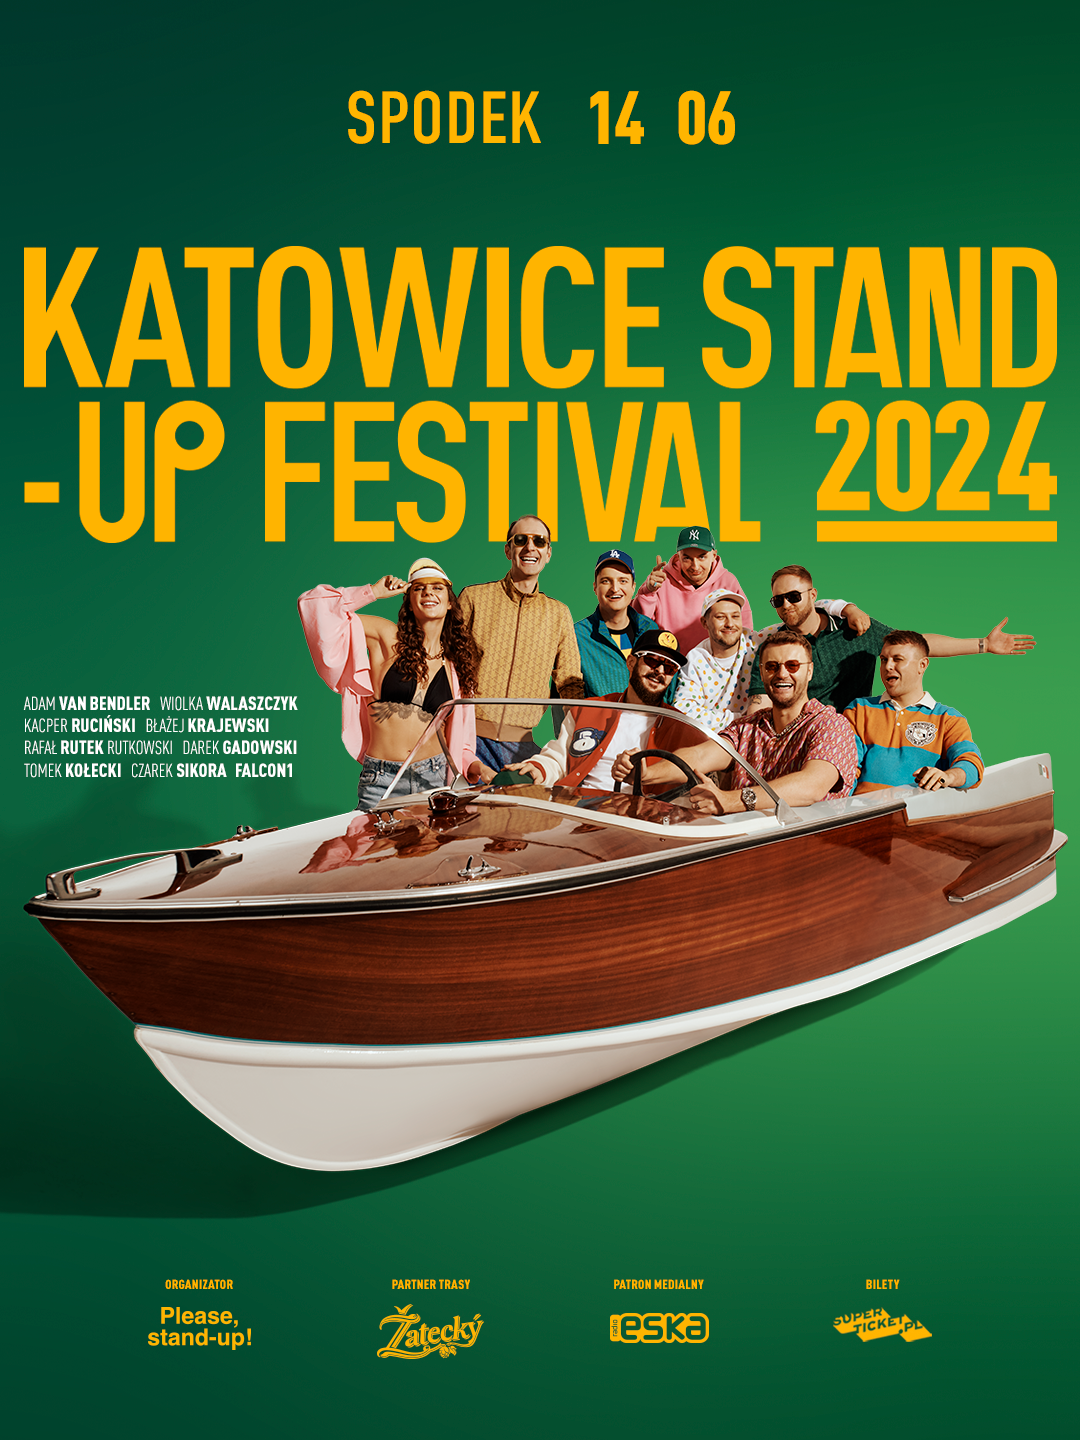 Katowice Stand-up Festival™ 2024 